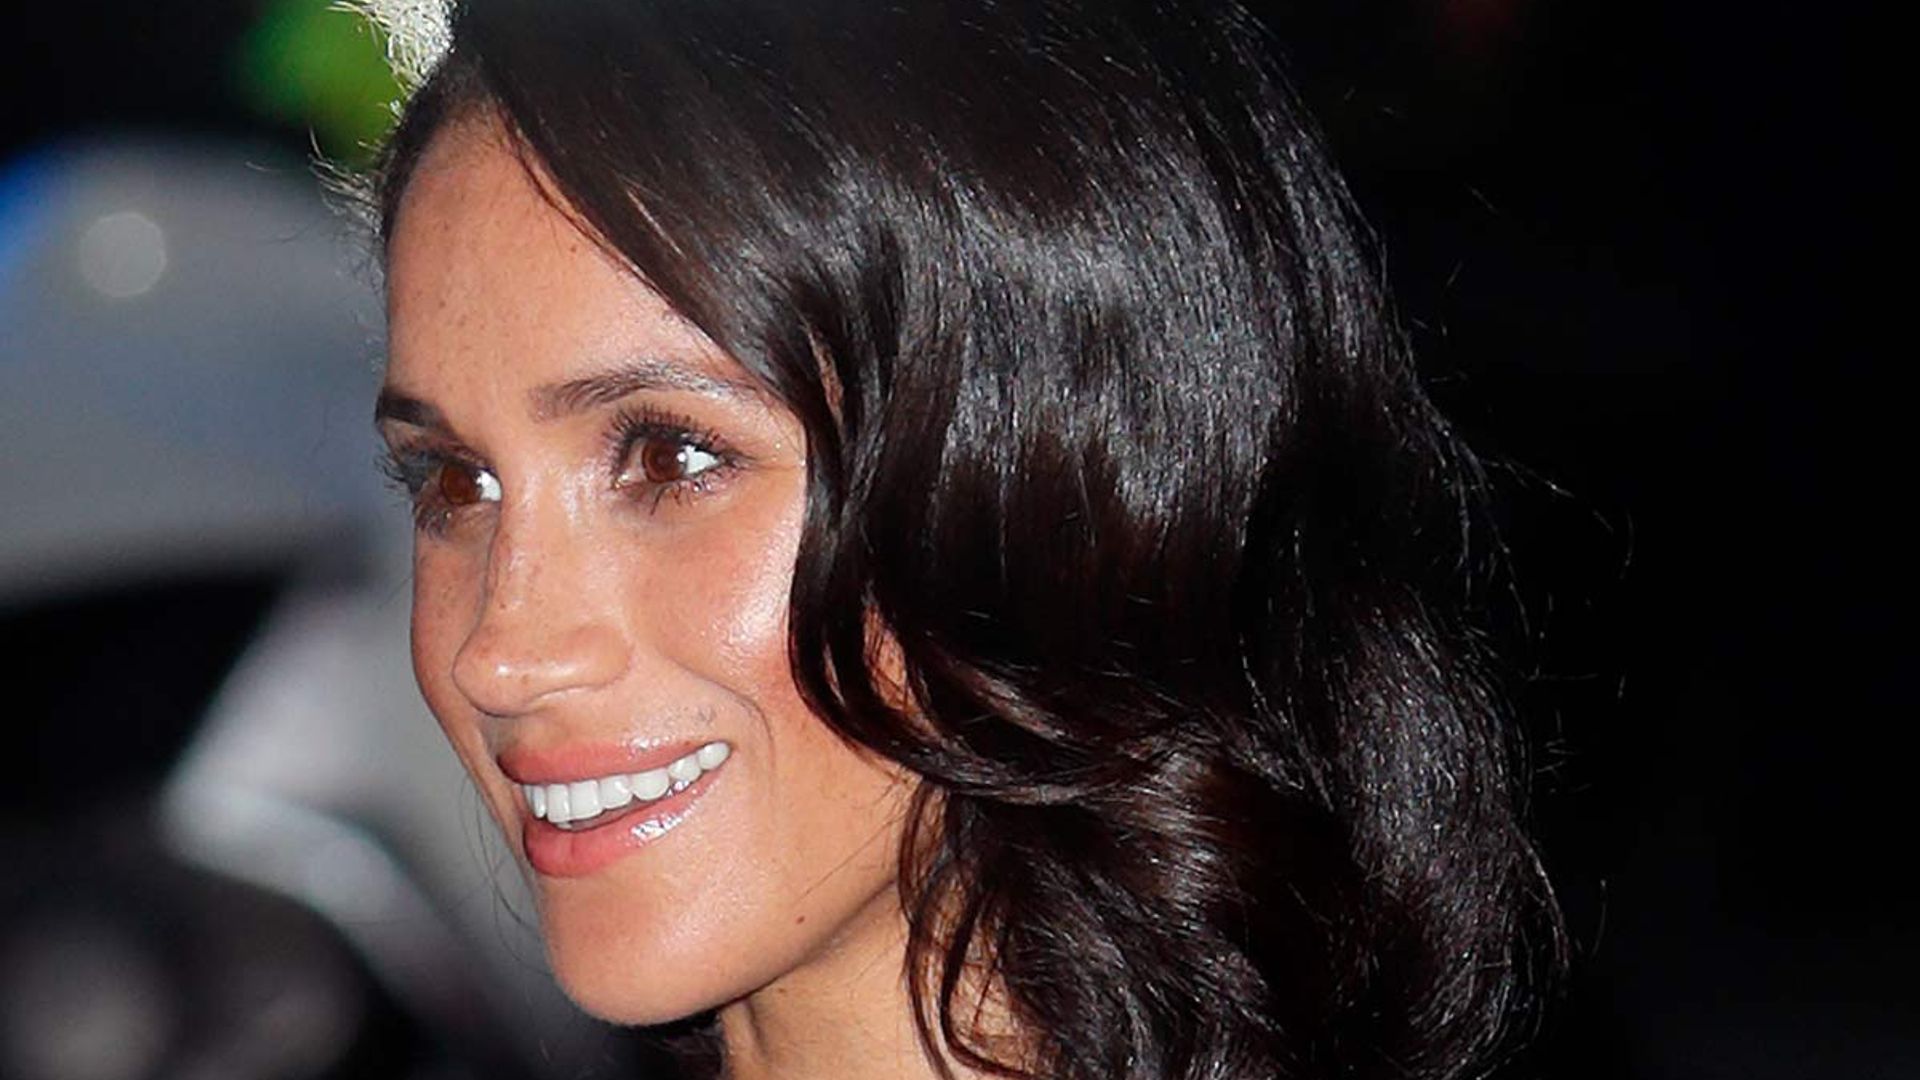 Meghan Markle's special Father's Day gift revealed